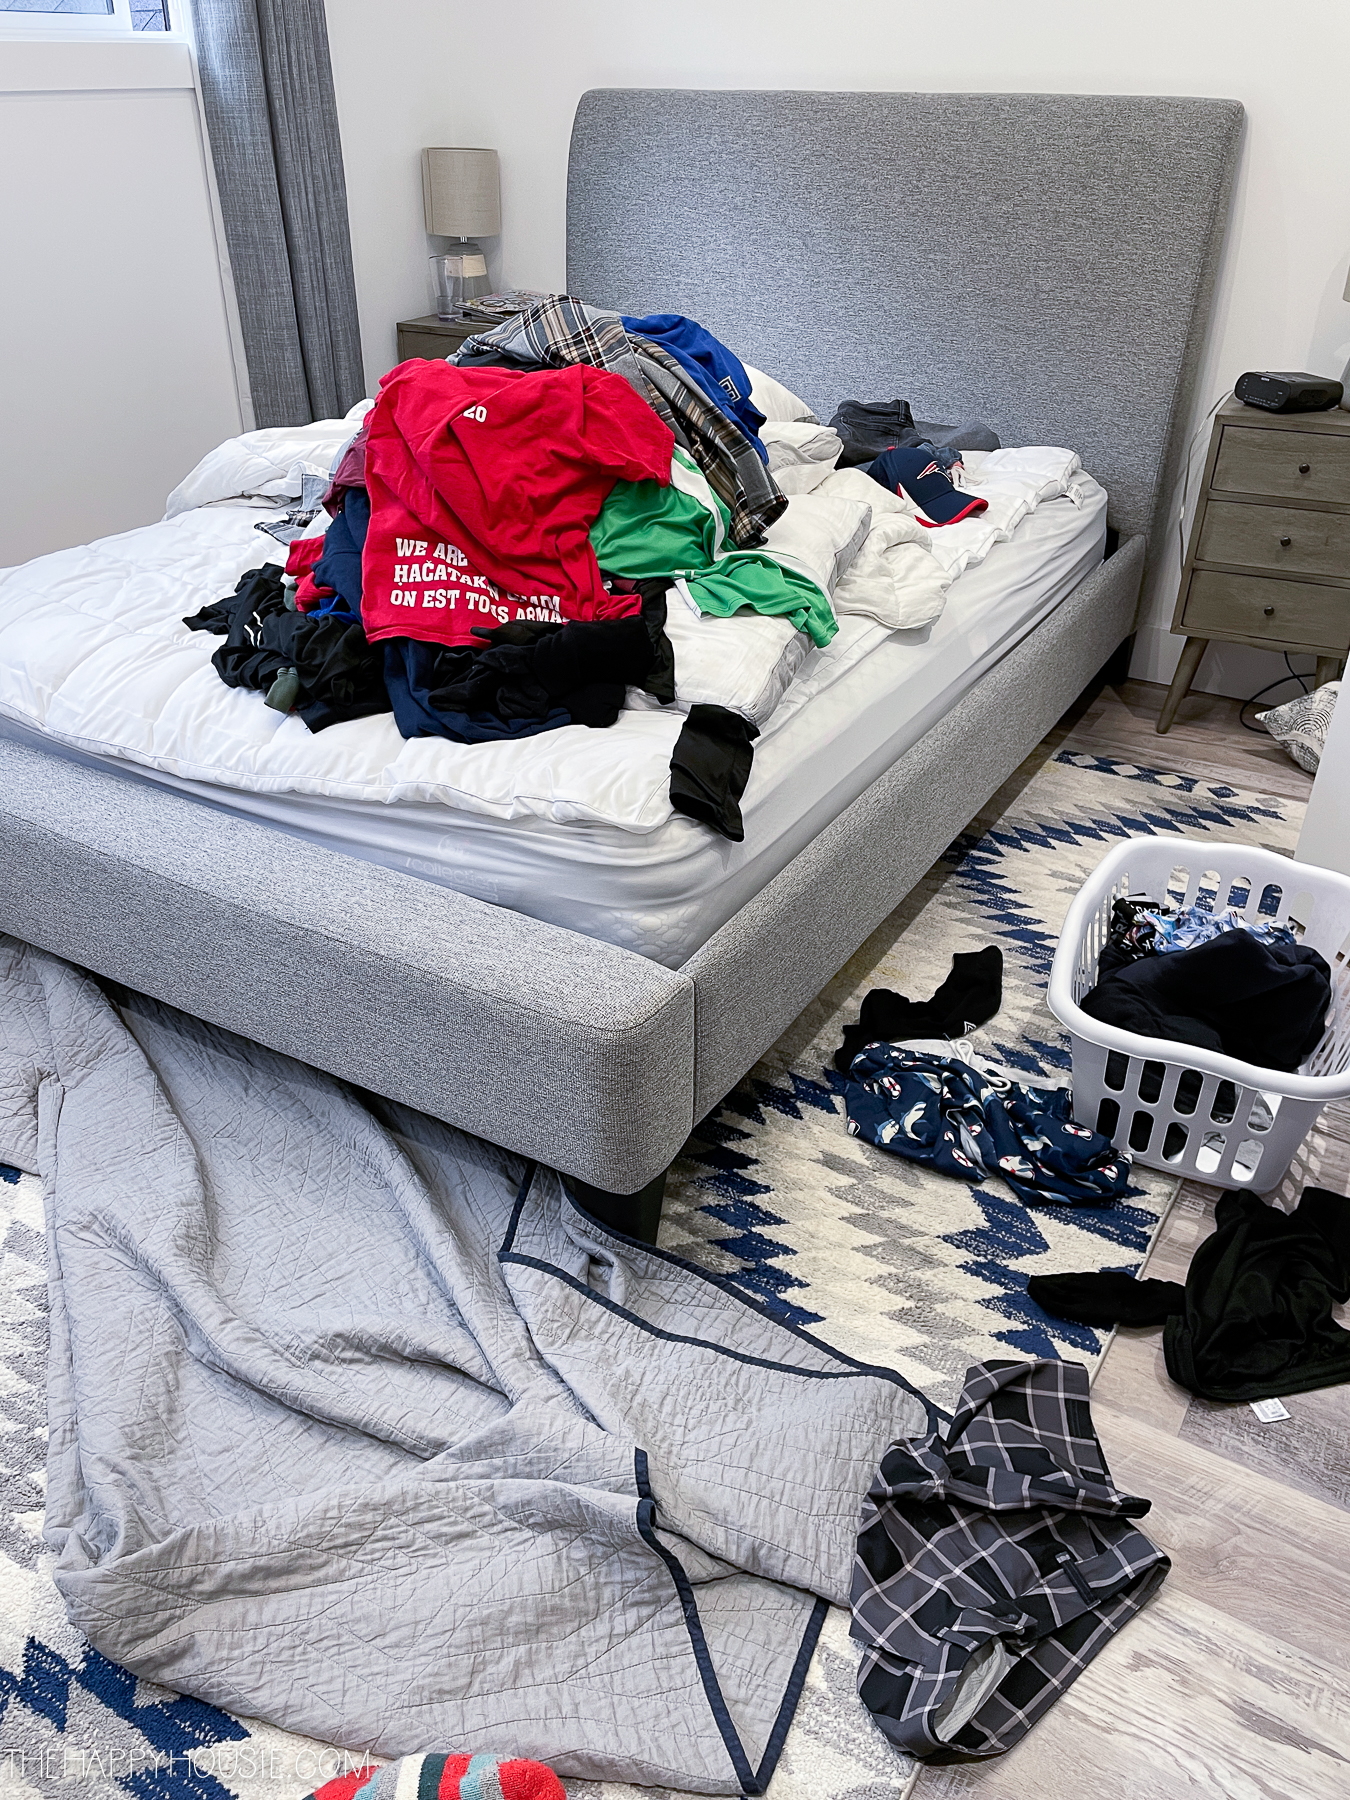 room organization ideas picture of clothes all over a bed being sorted to purge or keep